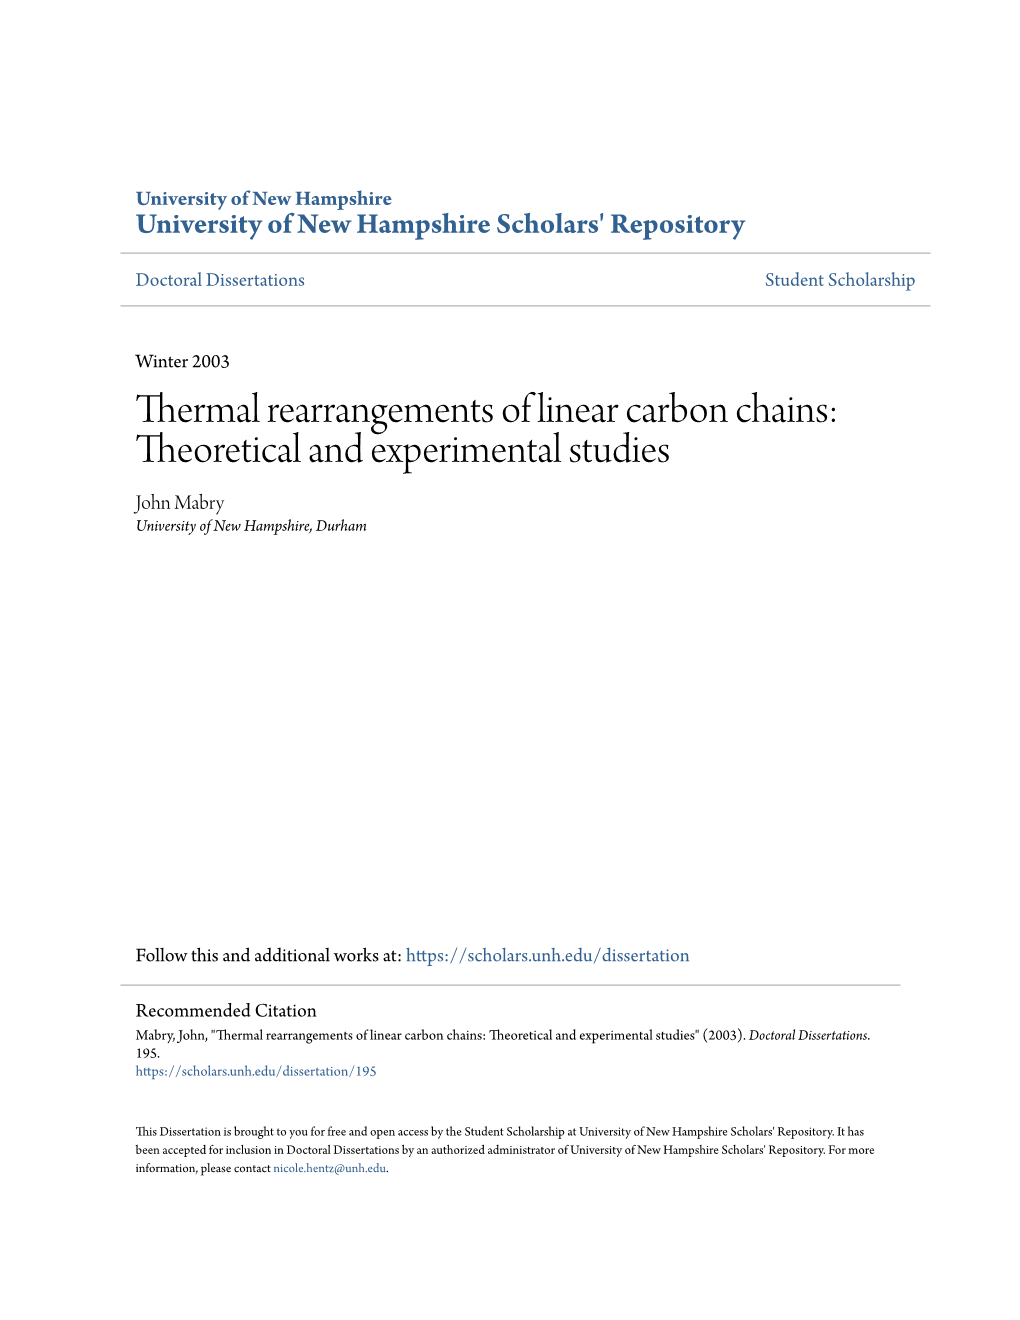 Thermal Rearrangements of Linear Carbon Chains: Theoretical and Experimental Studies John Mabry University of New Hampshire, Durham